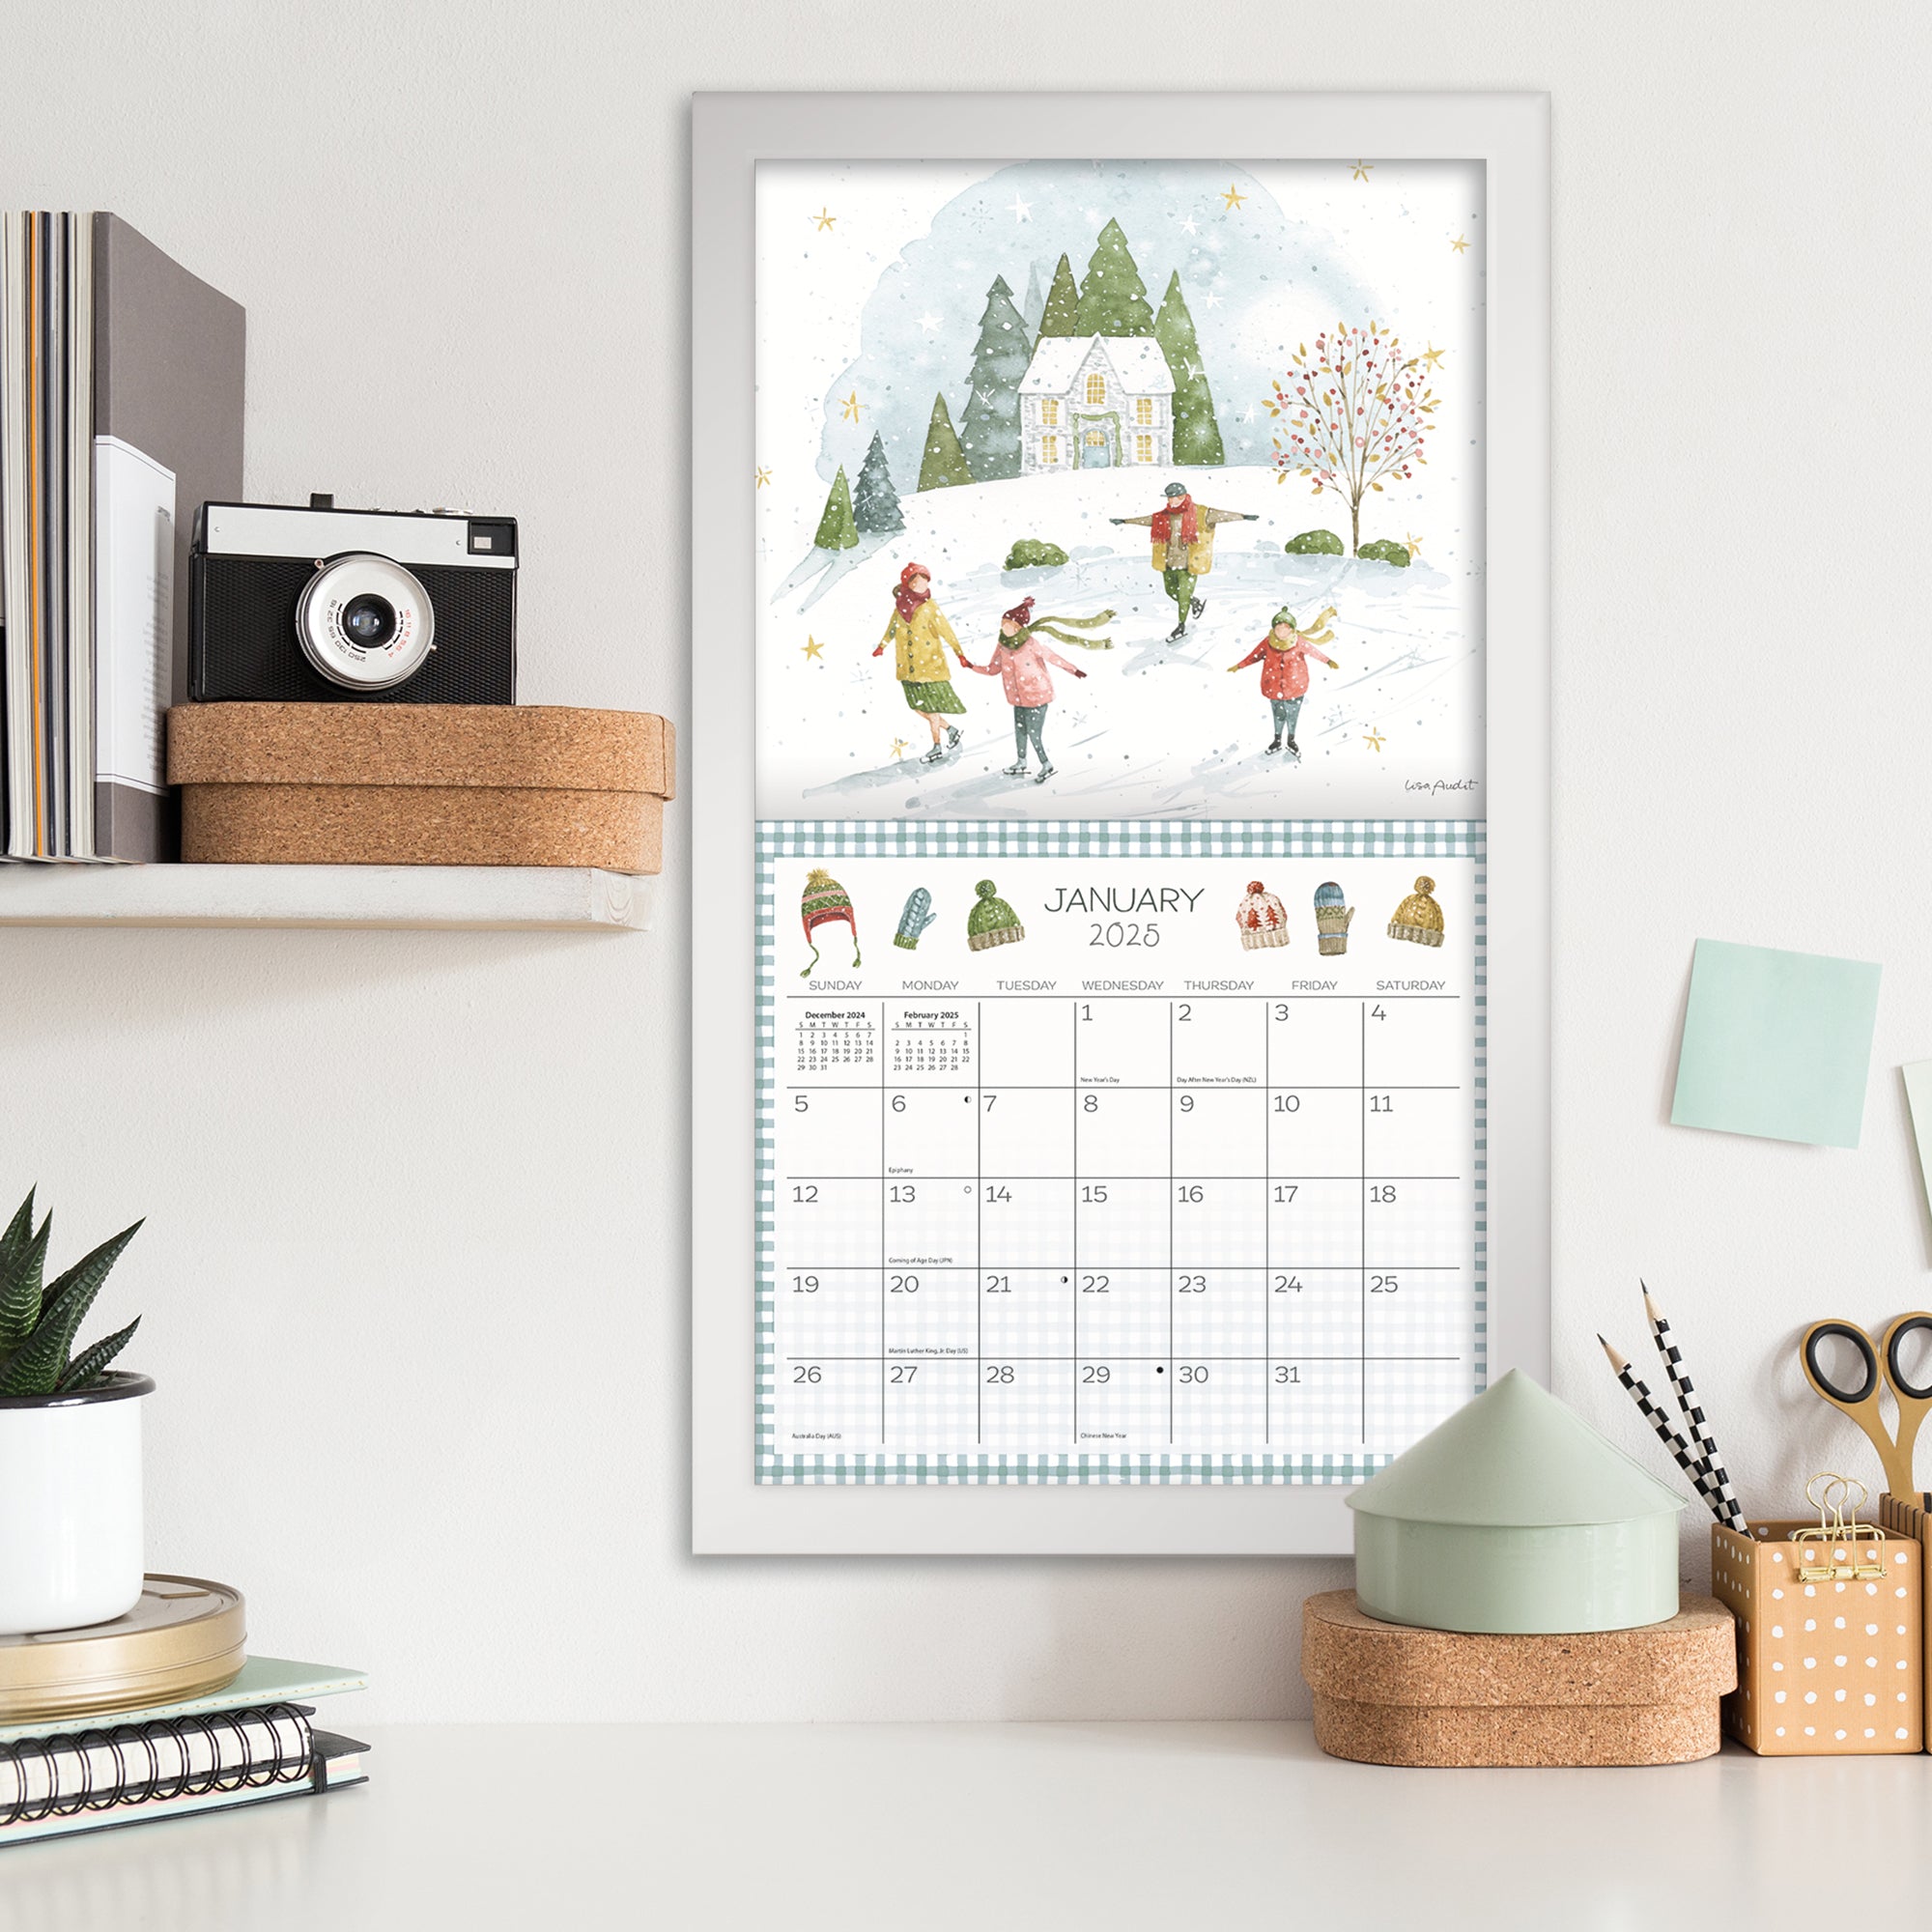 2025 LANG Blissful Moments By Lisa Audit - Deluxe Wall Calendar